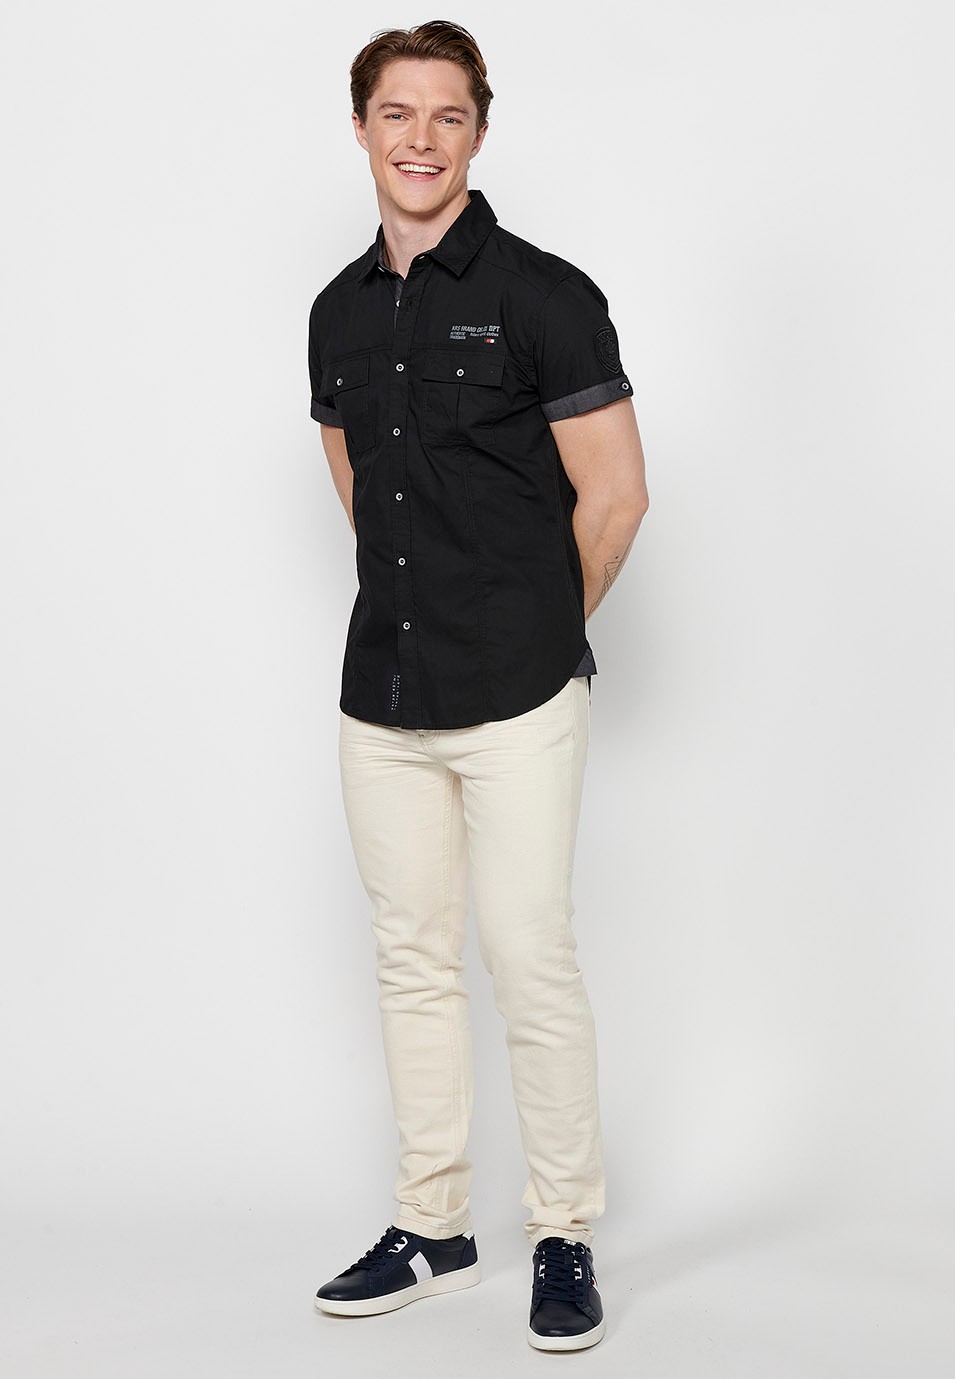 Short Sleeve Cotton Shirt with Button Front Closure and Front Flap Pockets in black Color for Men